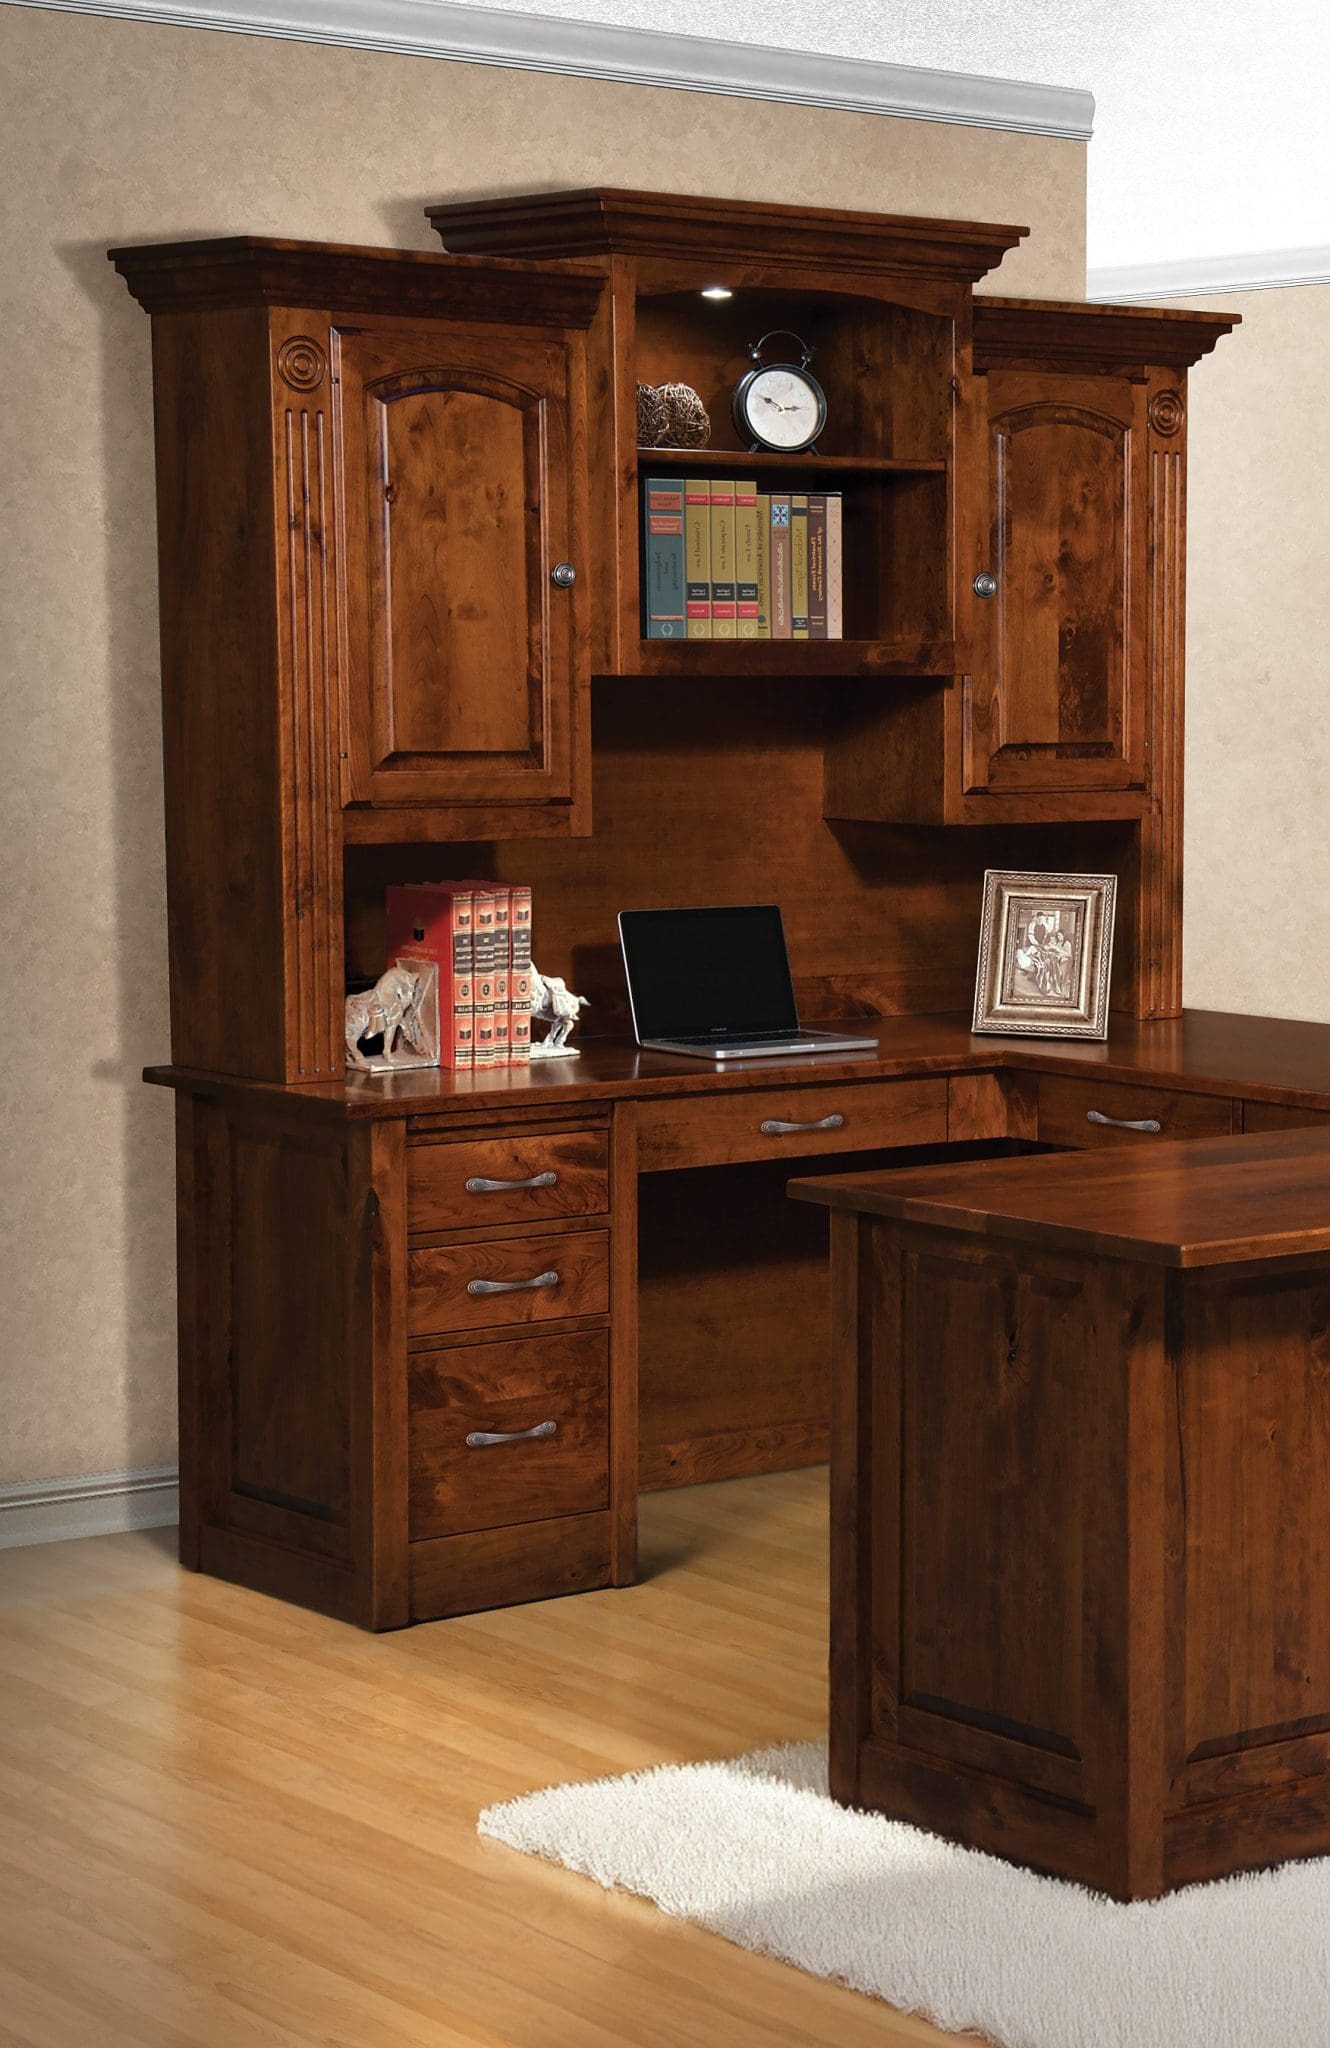 Large Victorian desk made from brown hardwood with cabinets, drawers, open shelves, and an L-shaped desk.